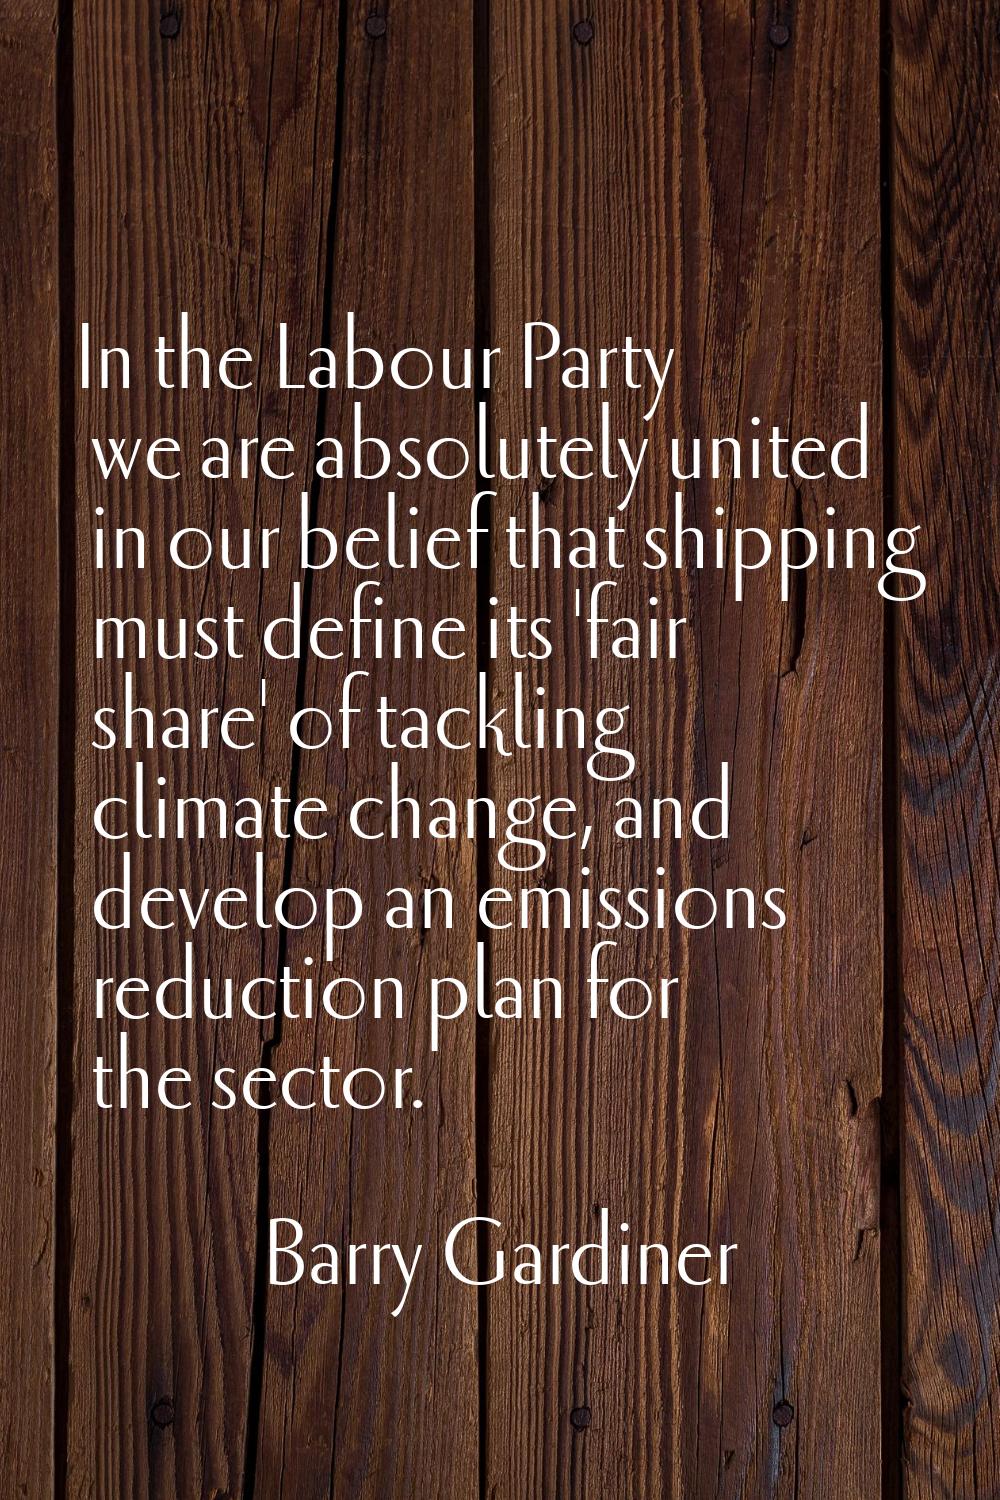 In the Labour Party we are absolutely united in our belief that shipping must define its 'fair shar